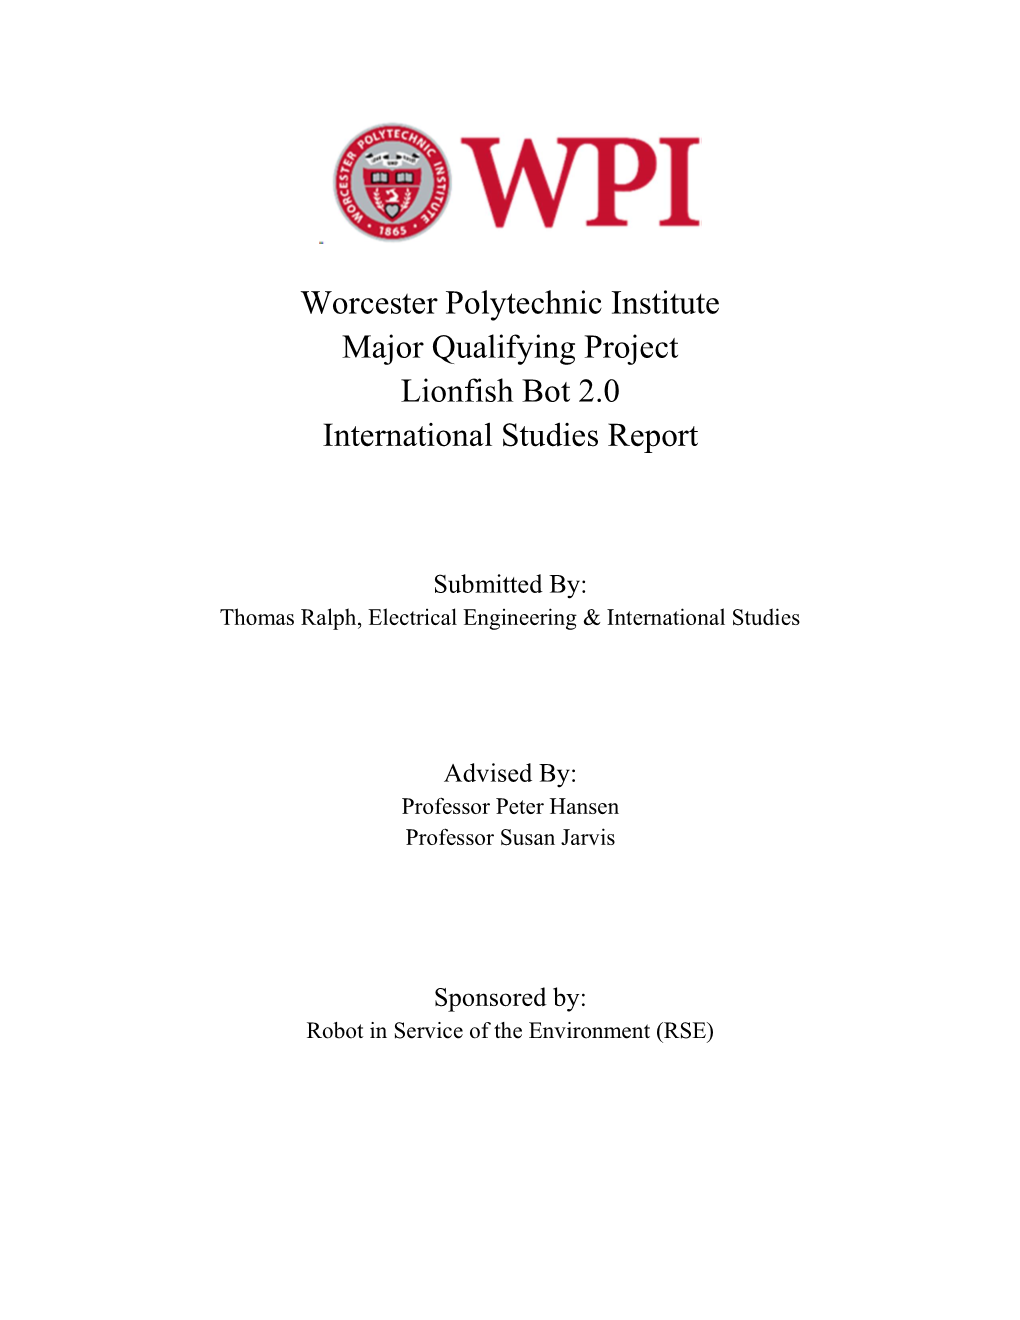 Worcester Polytechnic Institute Major Qualifying Project Lionfish Bot 2.0 International Studies Report